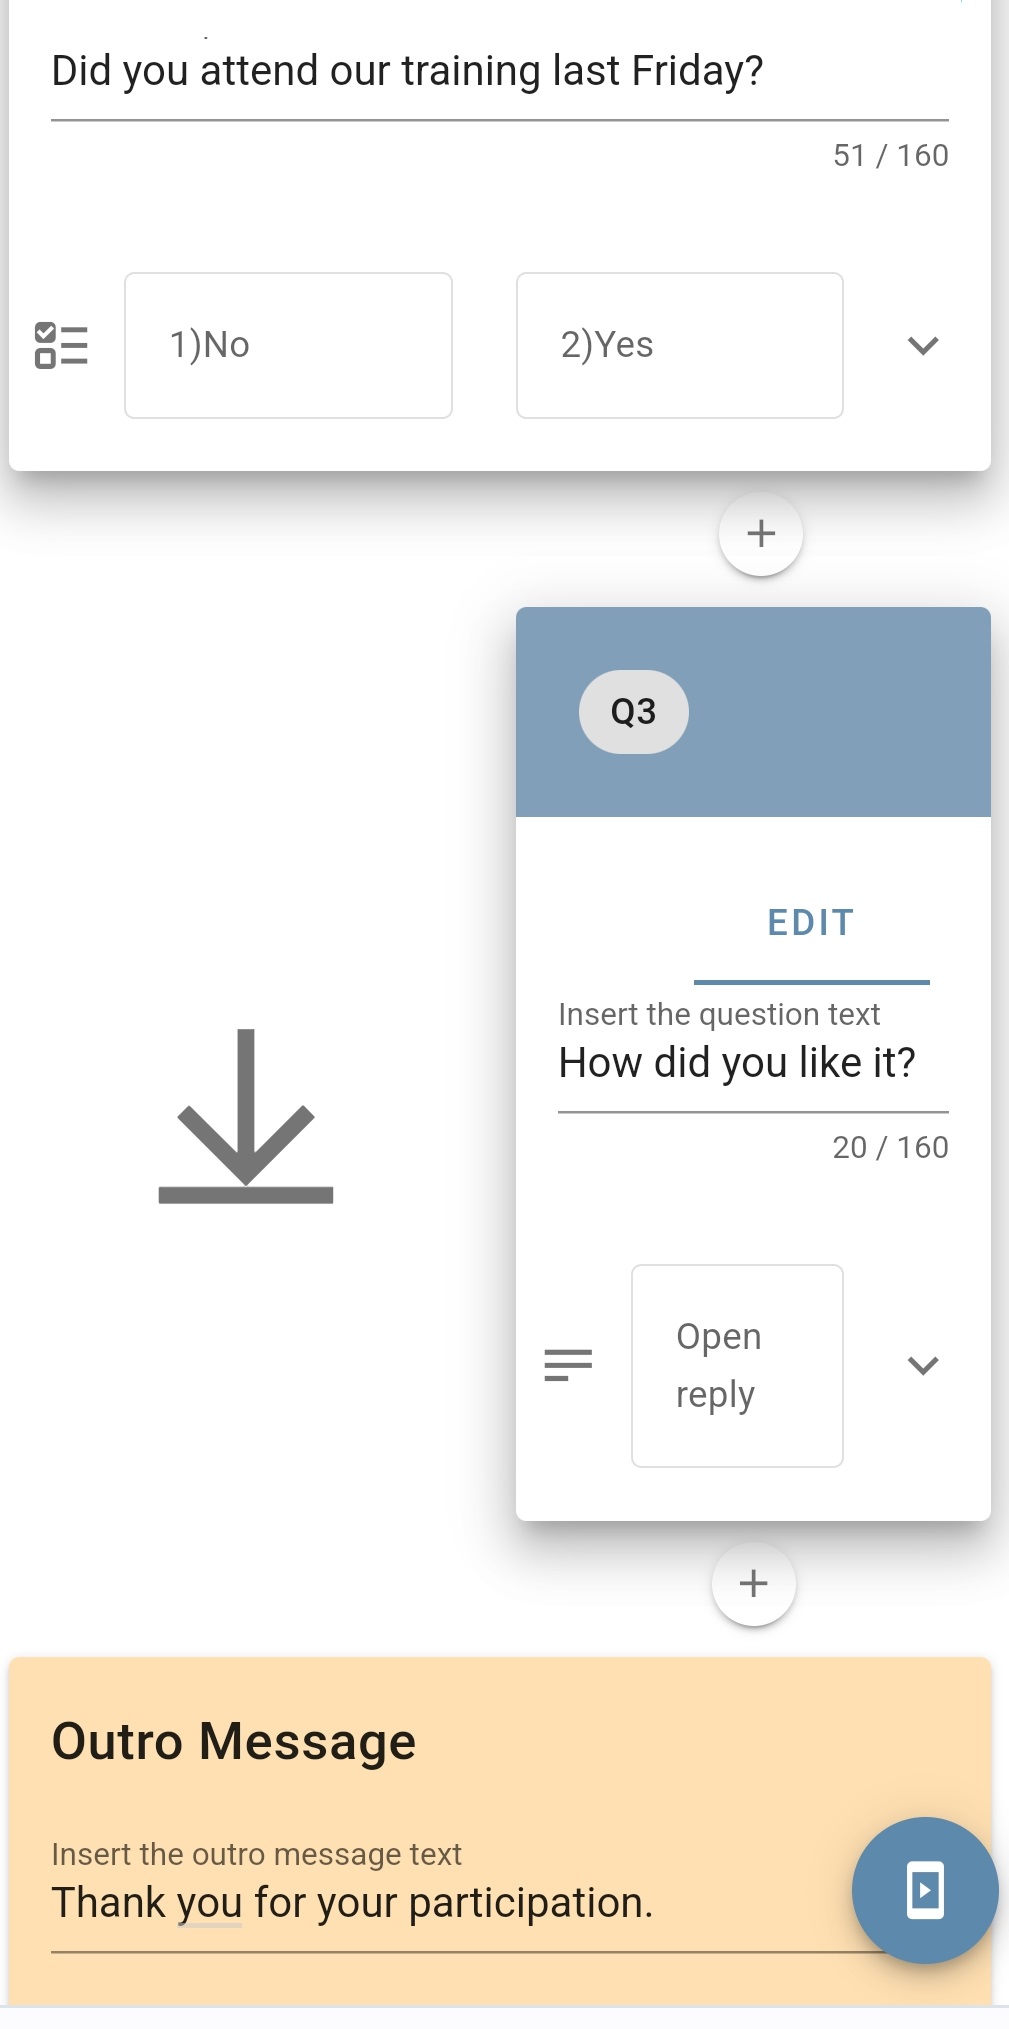 Screenshot of Impaxio's SMS and WhatsApp survey platform. Shows different questions and a logic, where one question is only shown if response to a previous question is 